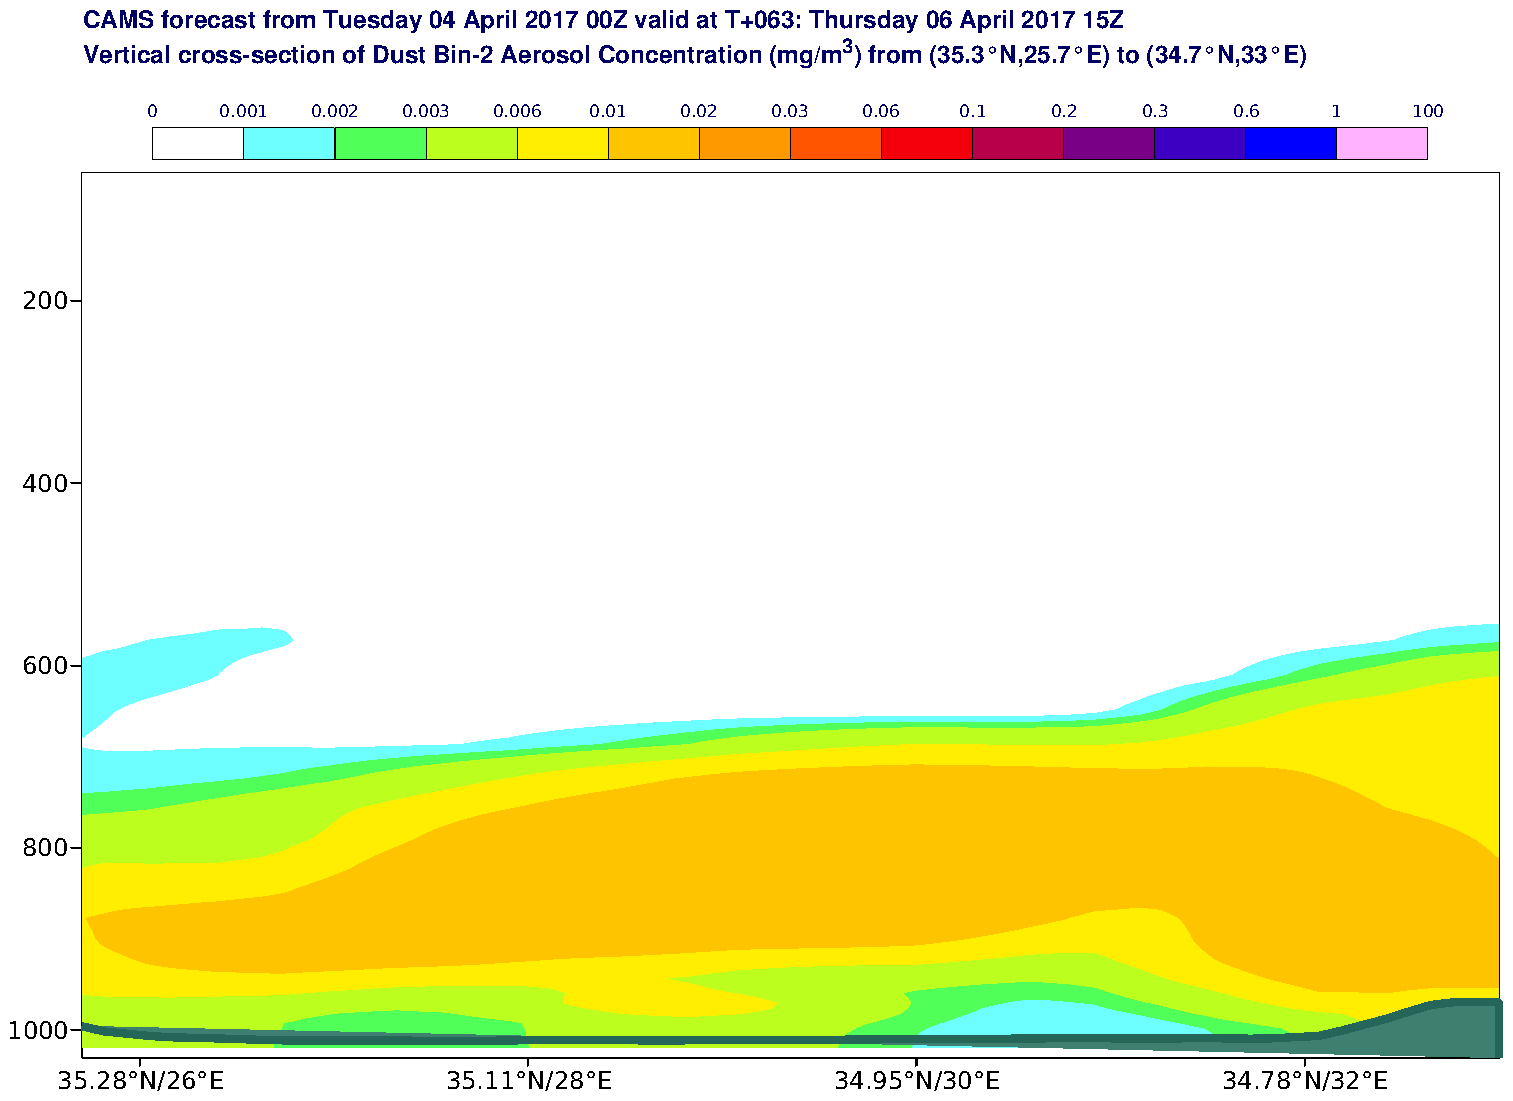 Vertical cross-section of Dust Bin-2 Aerosol Concentration (mg/m3) valid at T63 - 2017-04-06 15:00